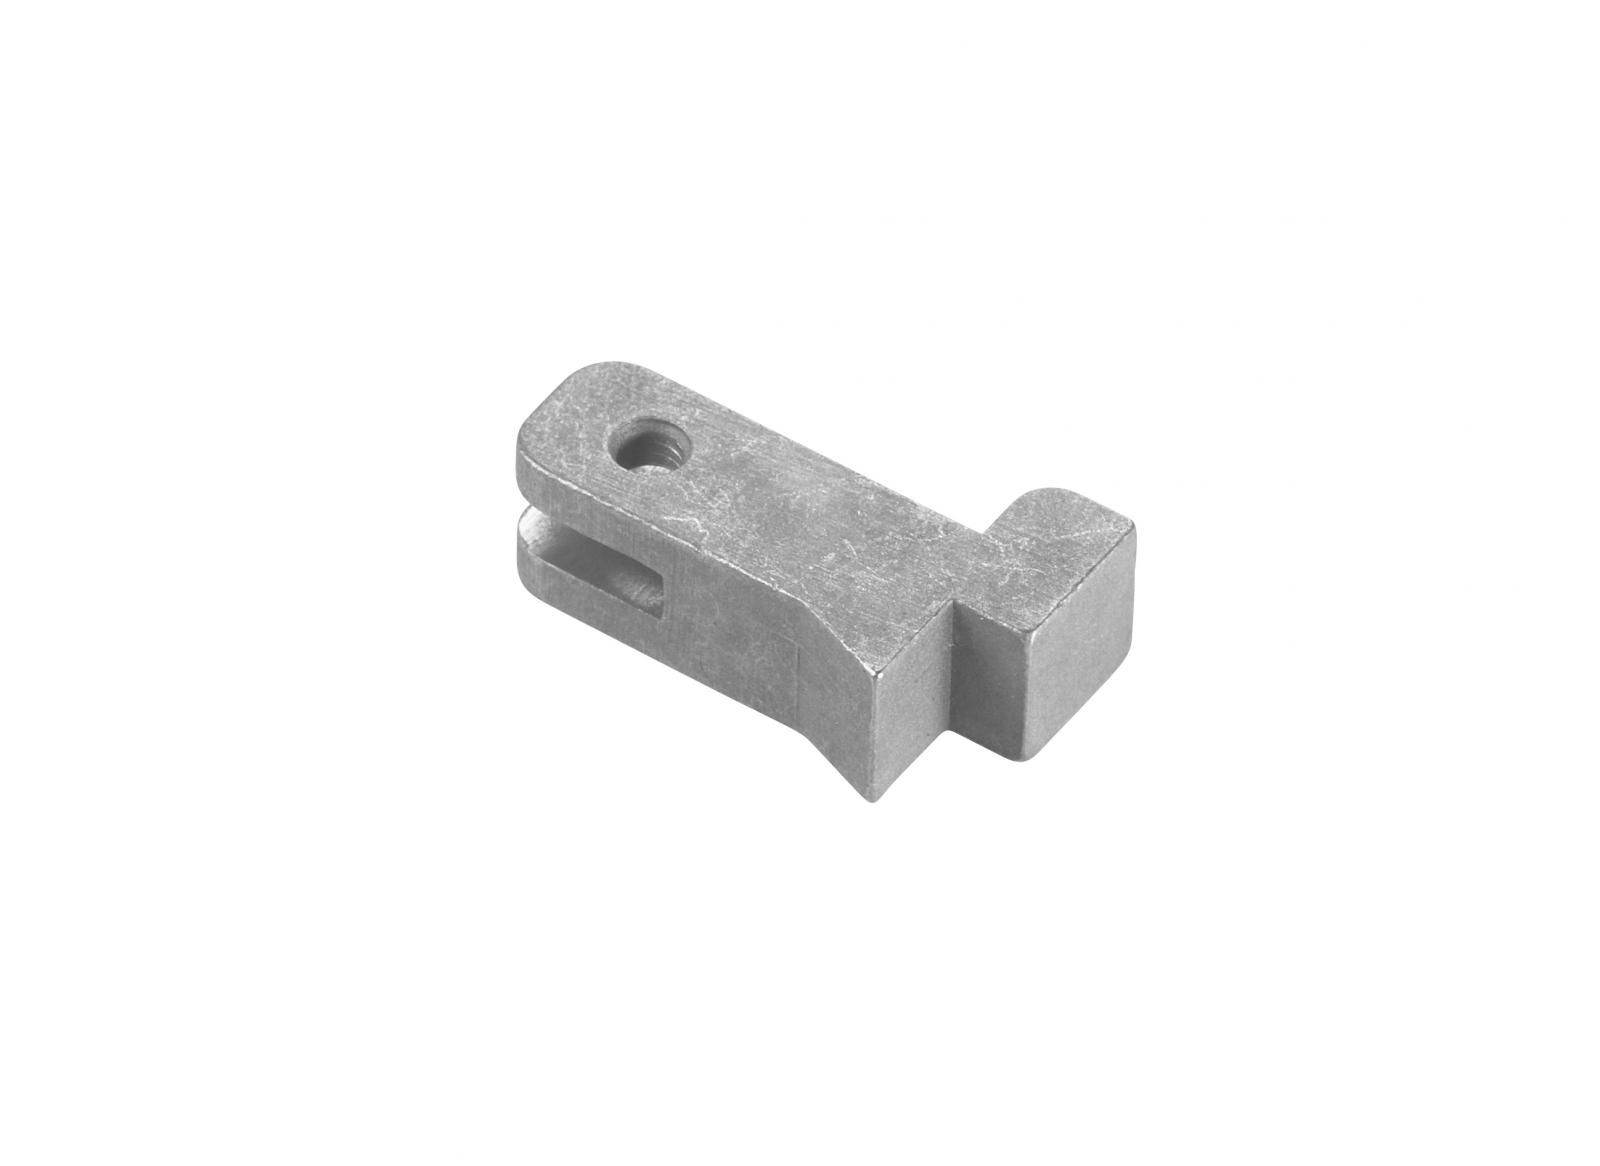 TapeTech® Lever. Part number 190001